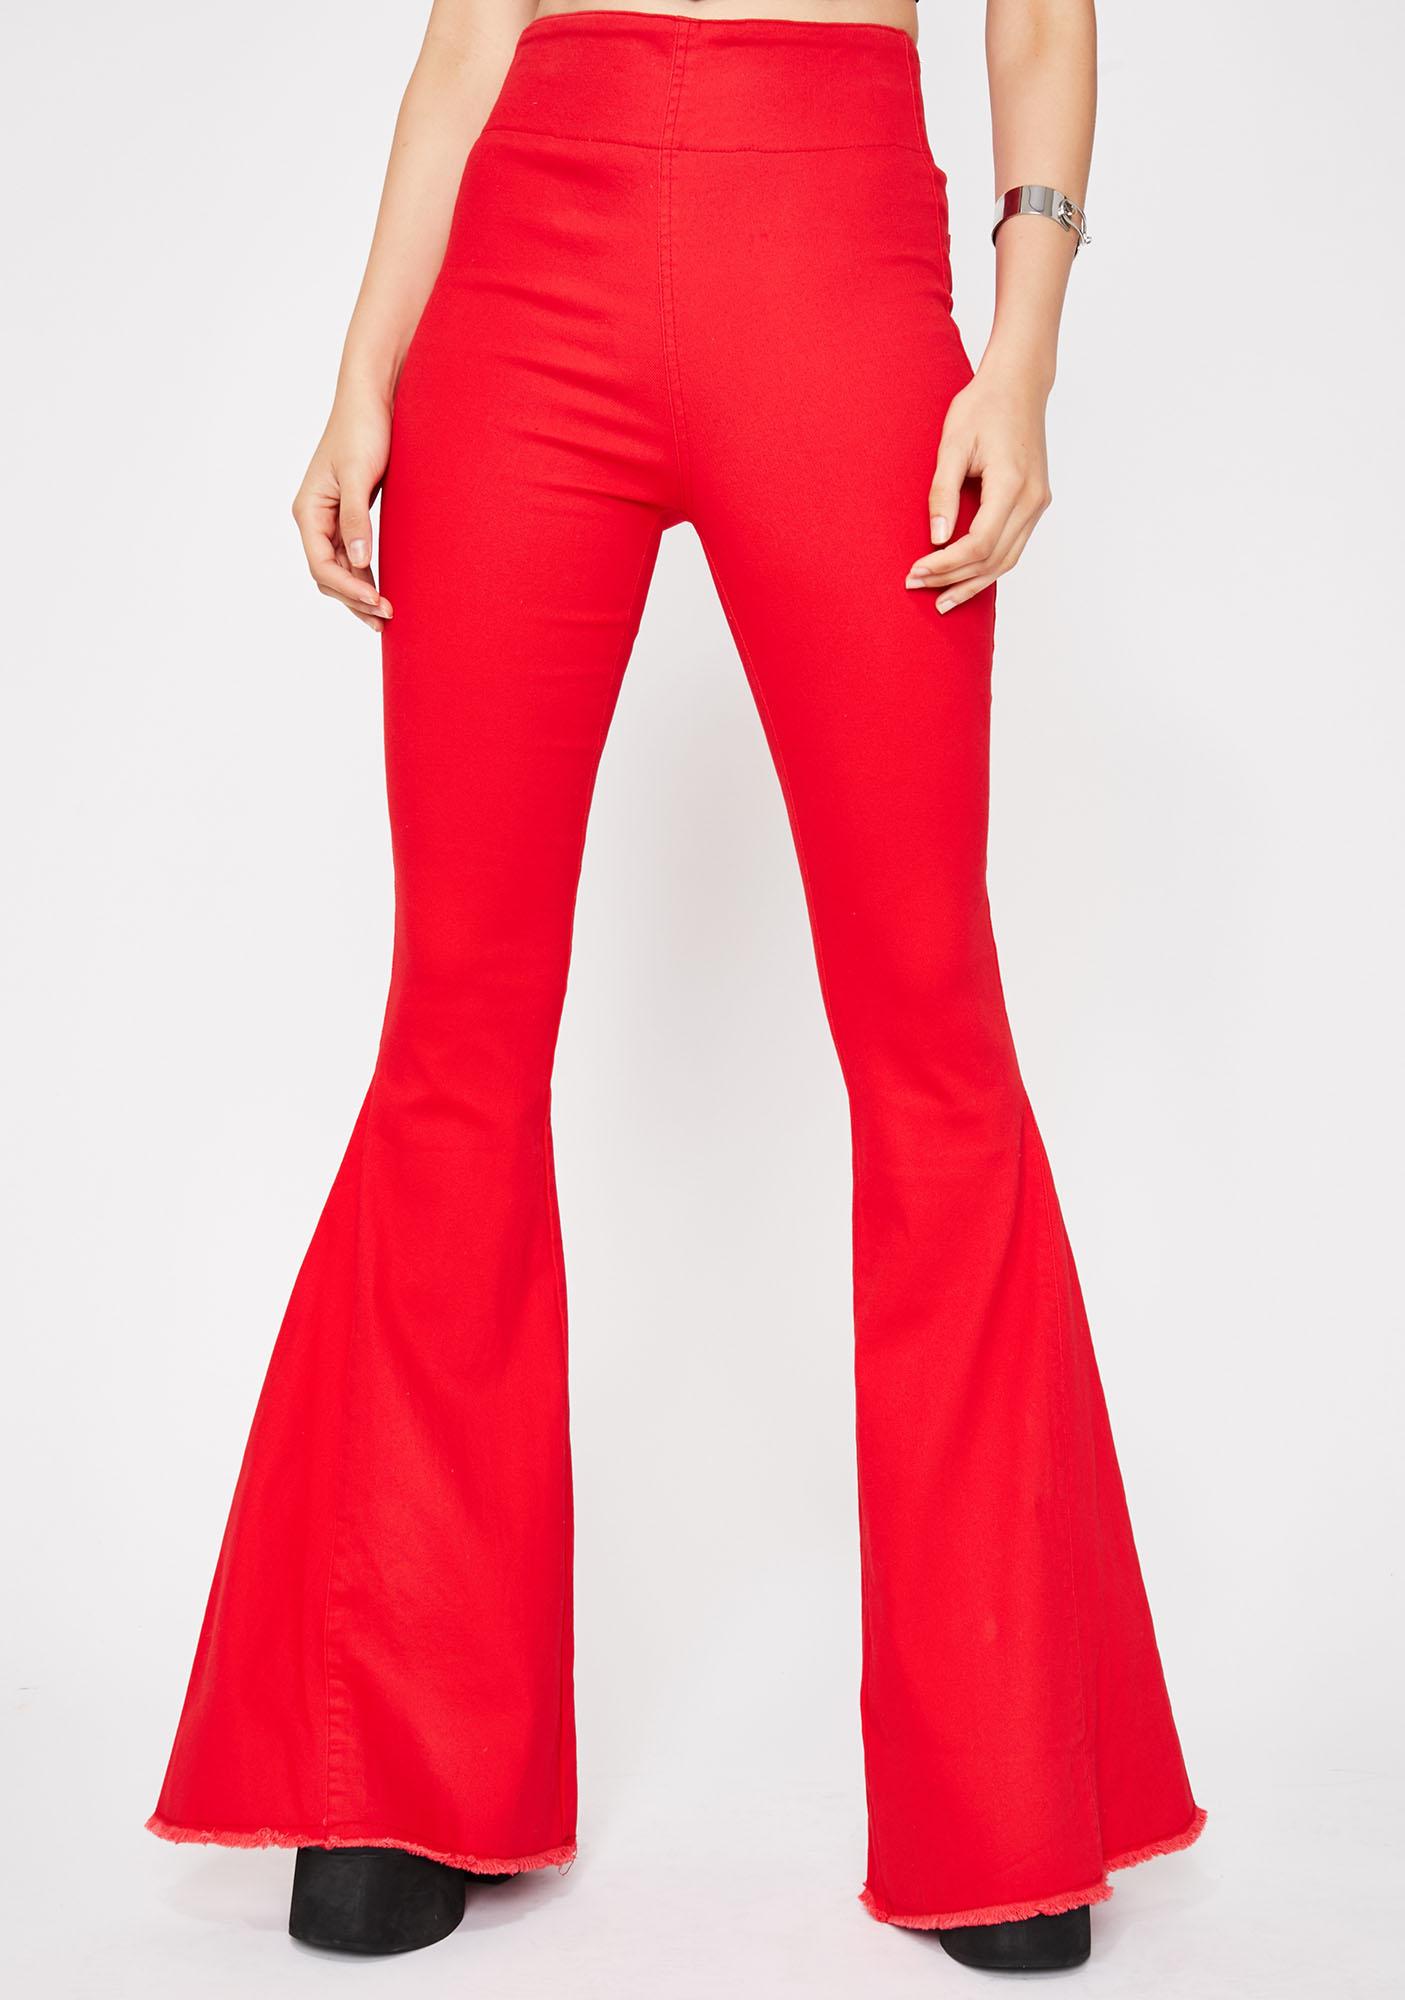 Faux Leather High Waist Flare Pants Bell Bottoms Red – Dolls Kill